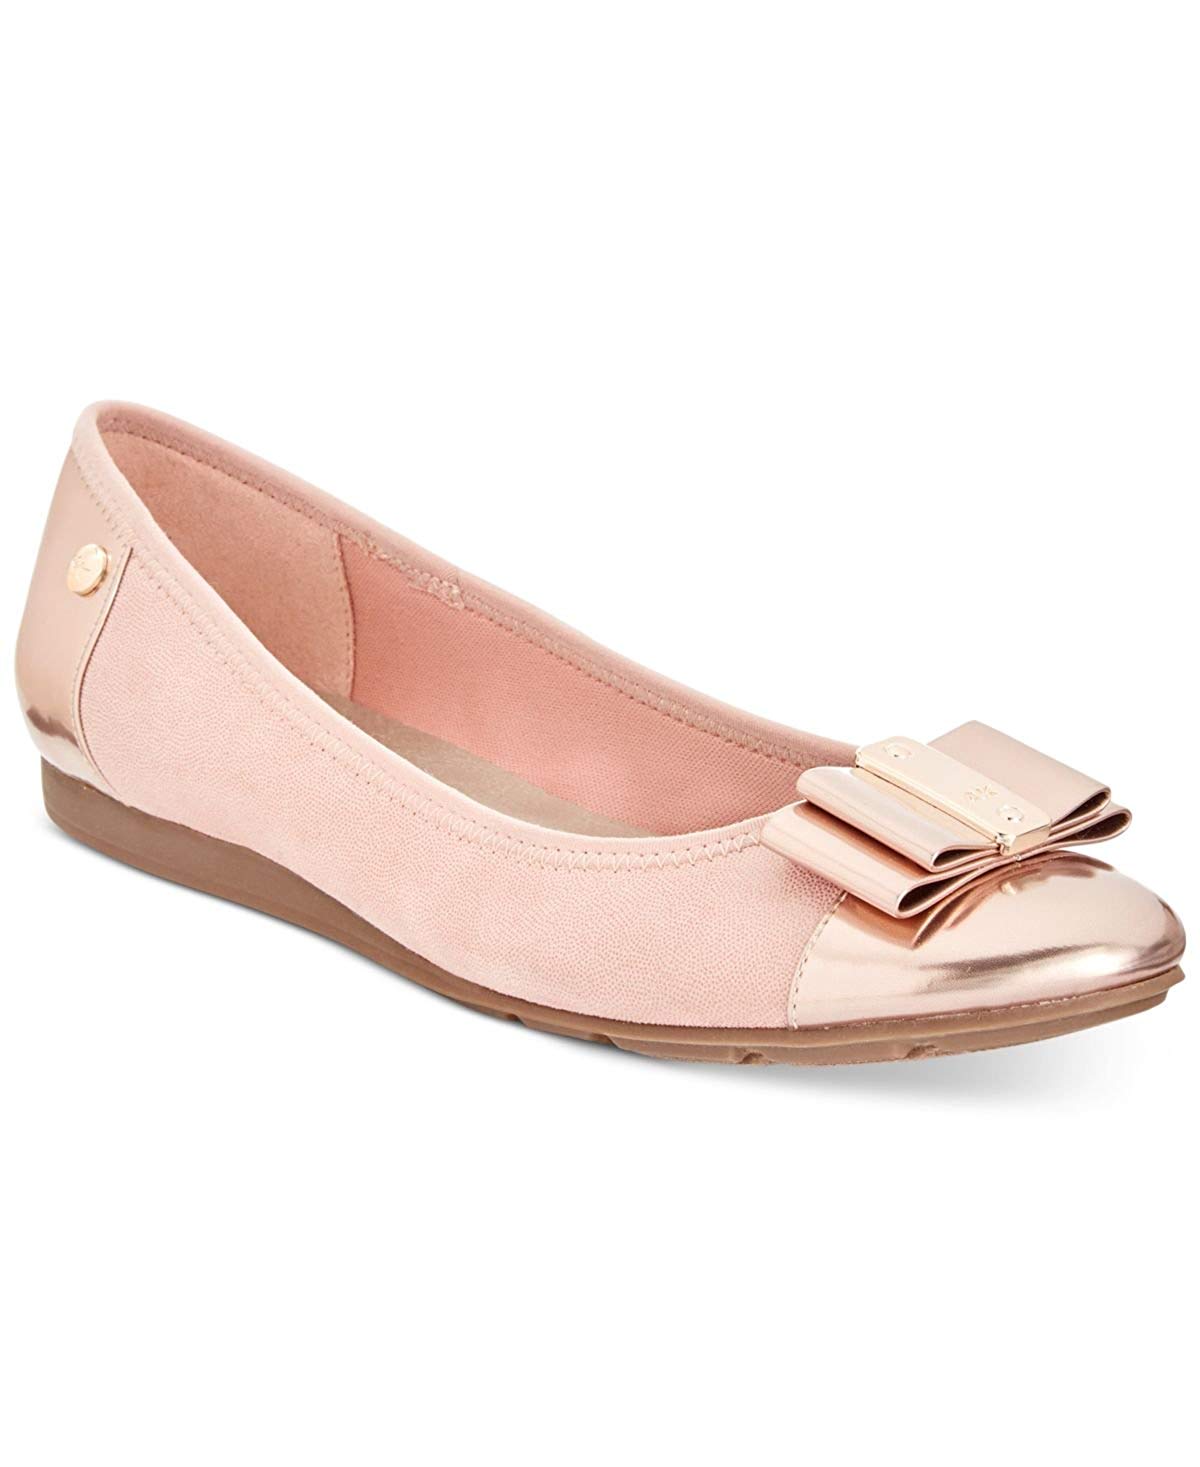 Anne Klein Womens Aricia Fabric Closed Toe Ballet Flats, Pink, Size 9.0 ...